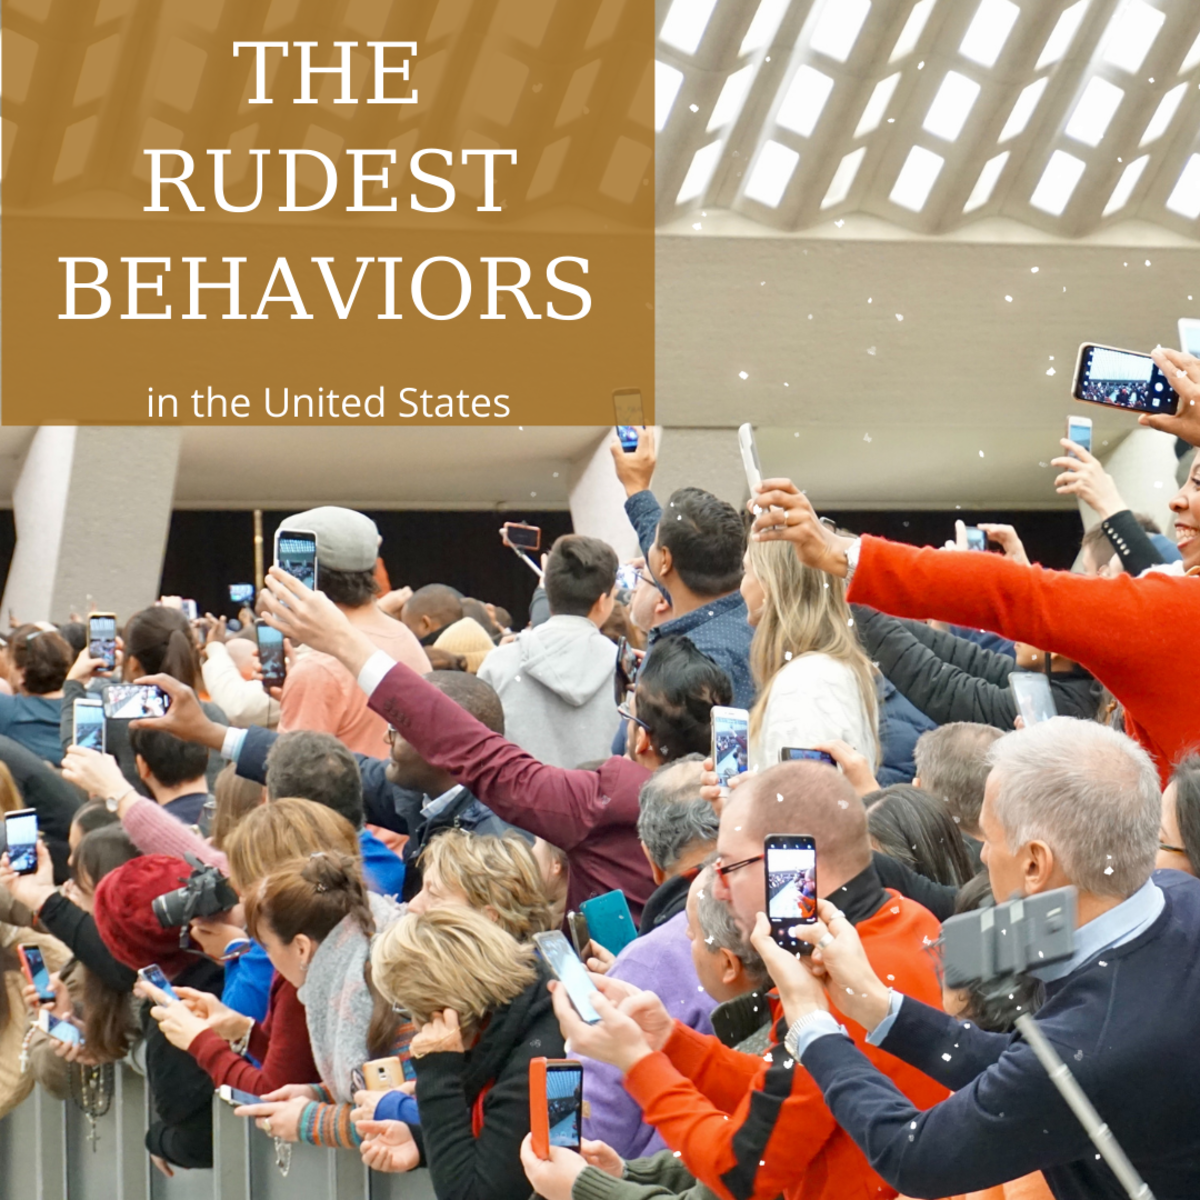 Learn the psychology of rude behavior and read about 25 of the rudest behaviors in the United States.